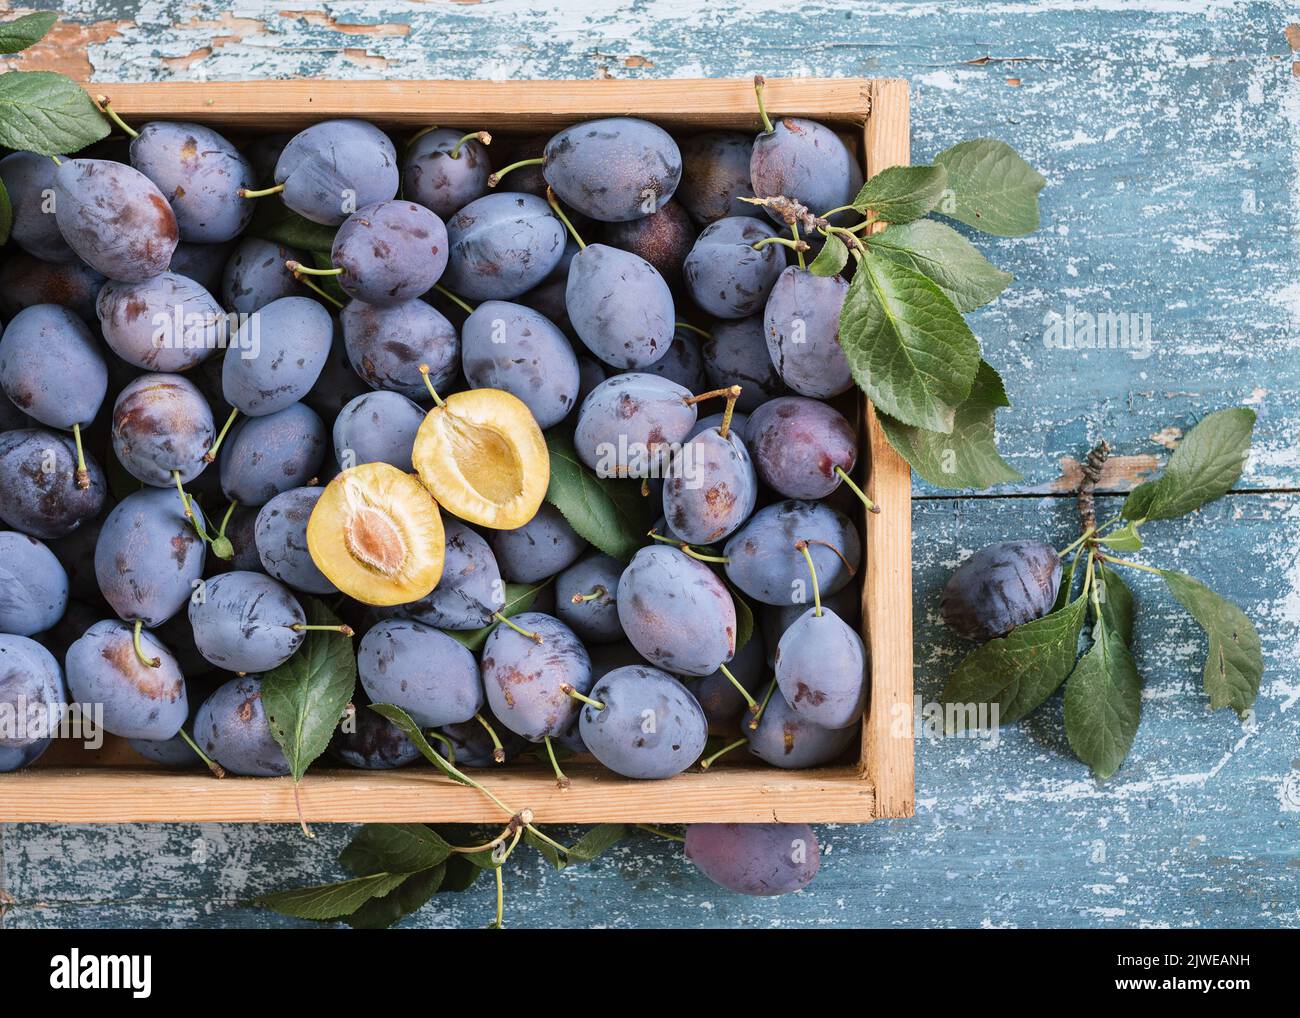 Harvested ripe plums in a wooden box on a rustic table Stock Photo